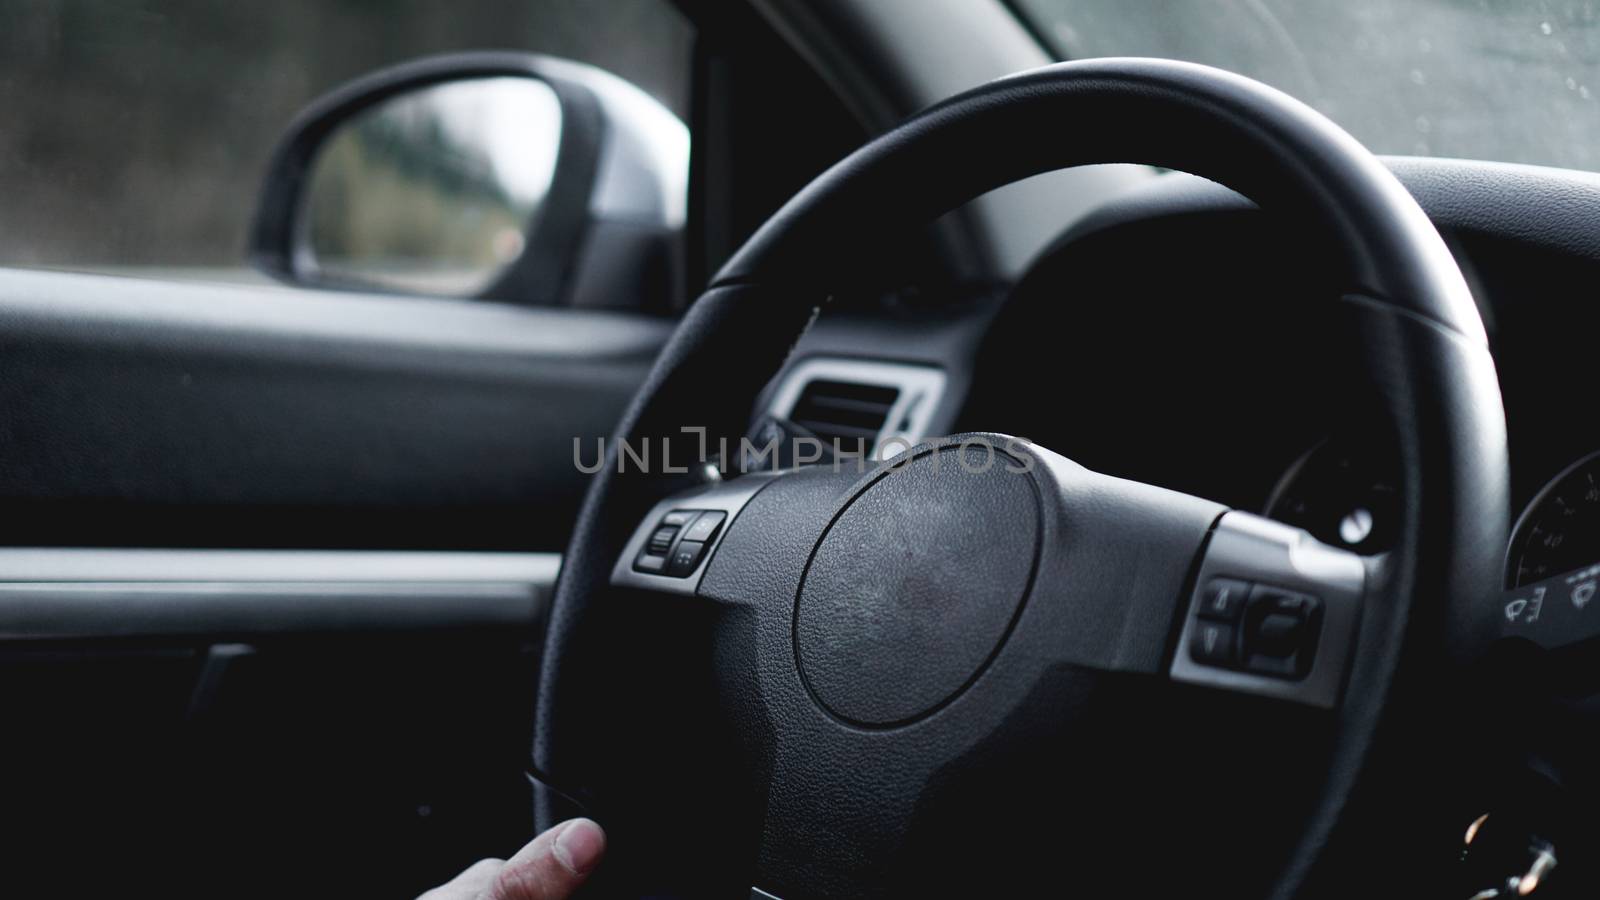 Interior view of car with black salon. Holding Steering Wheel While Driving Car by natali_brill